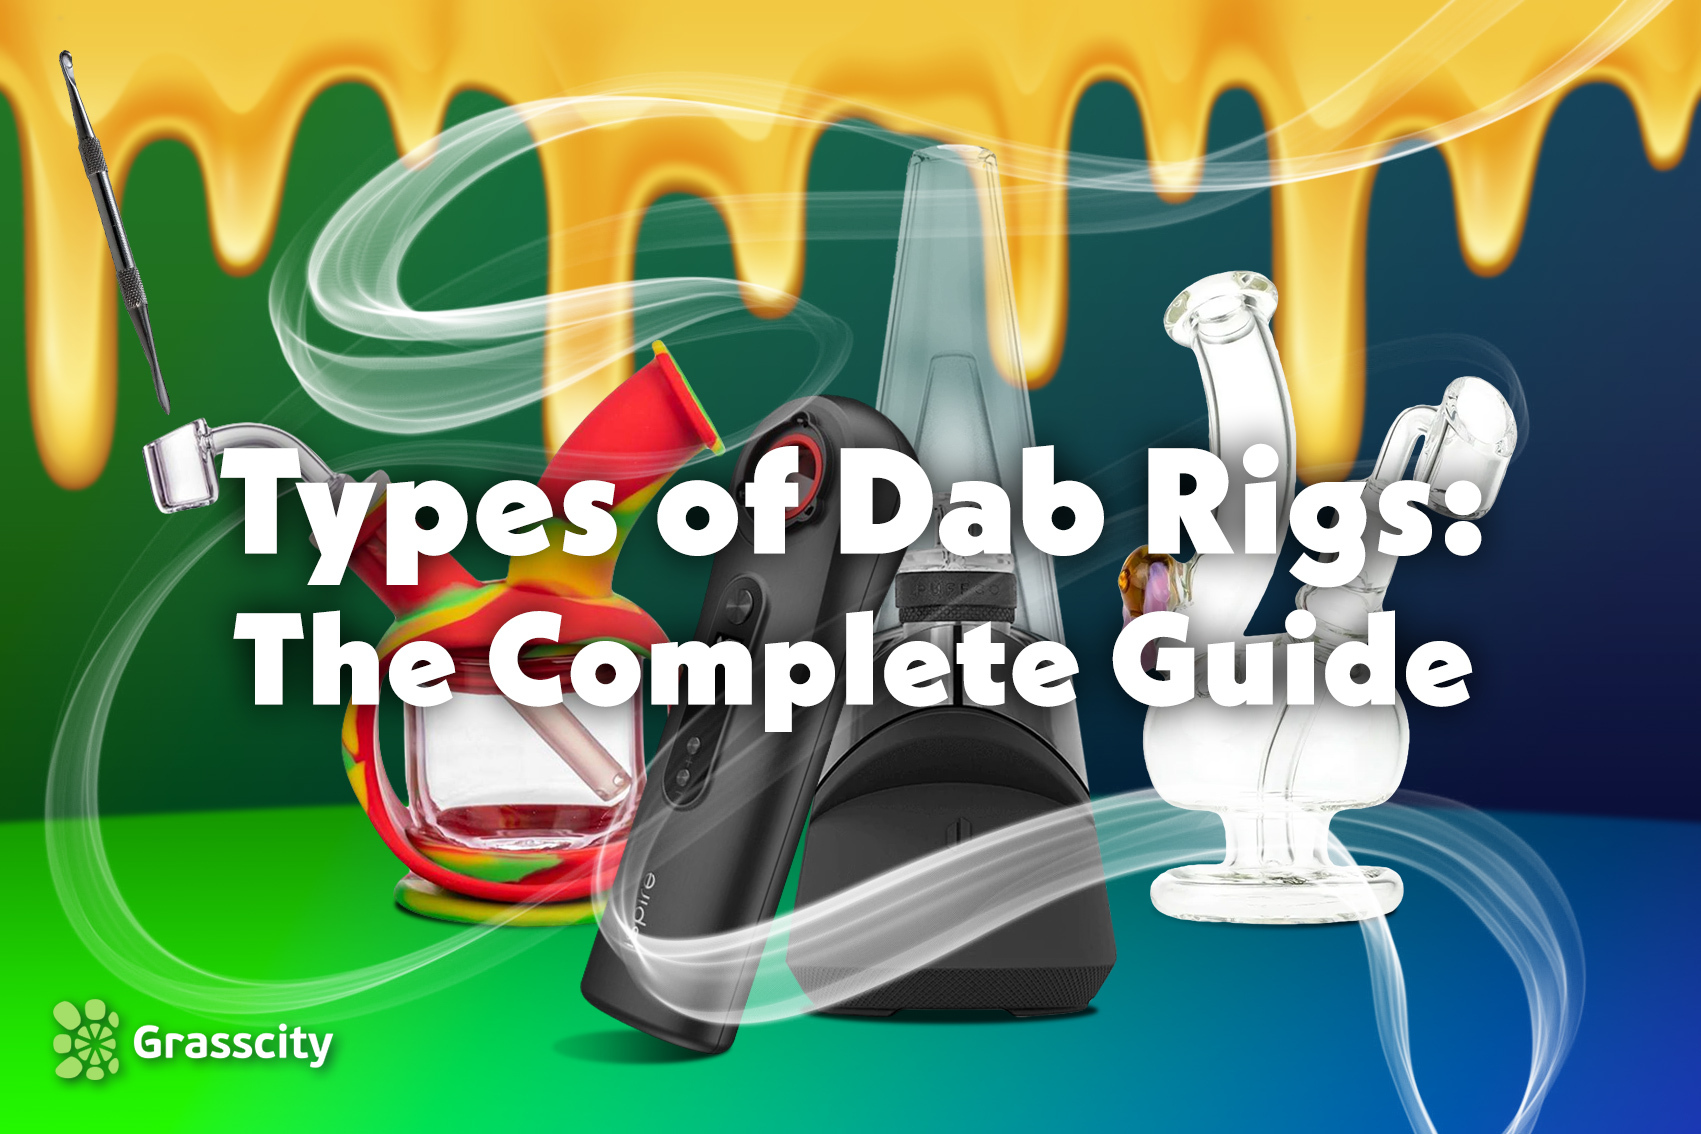 https://www.grasscity.com/media/magefan_blog/Types-of-Dab-Rigs-The-Complete-Guide--GrassCity-01.jpg